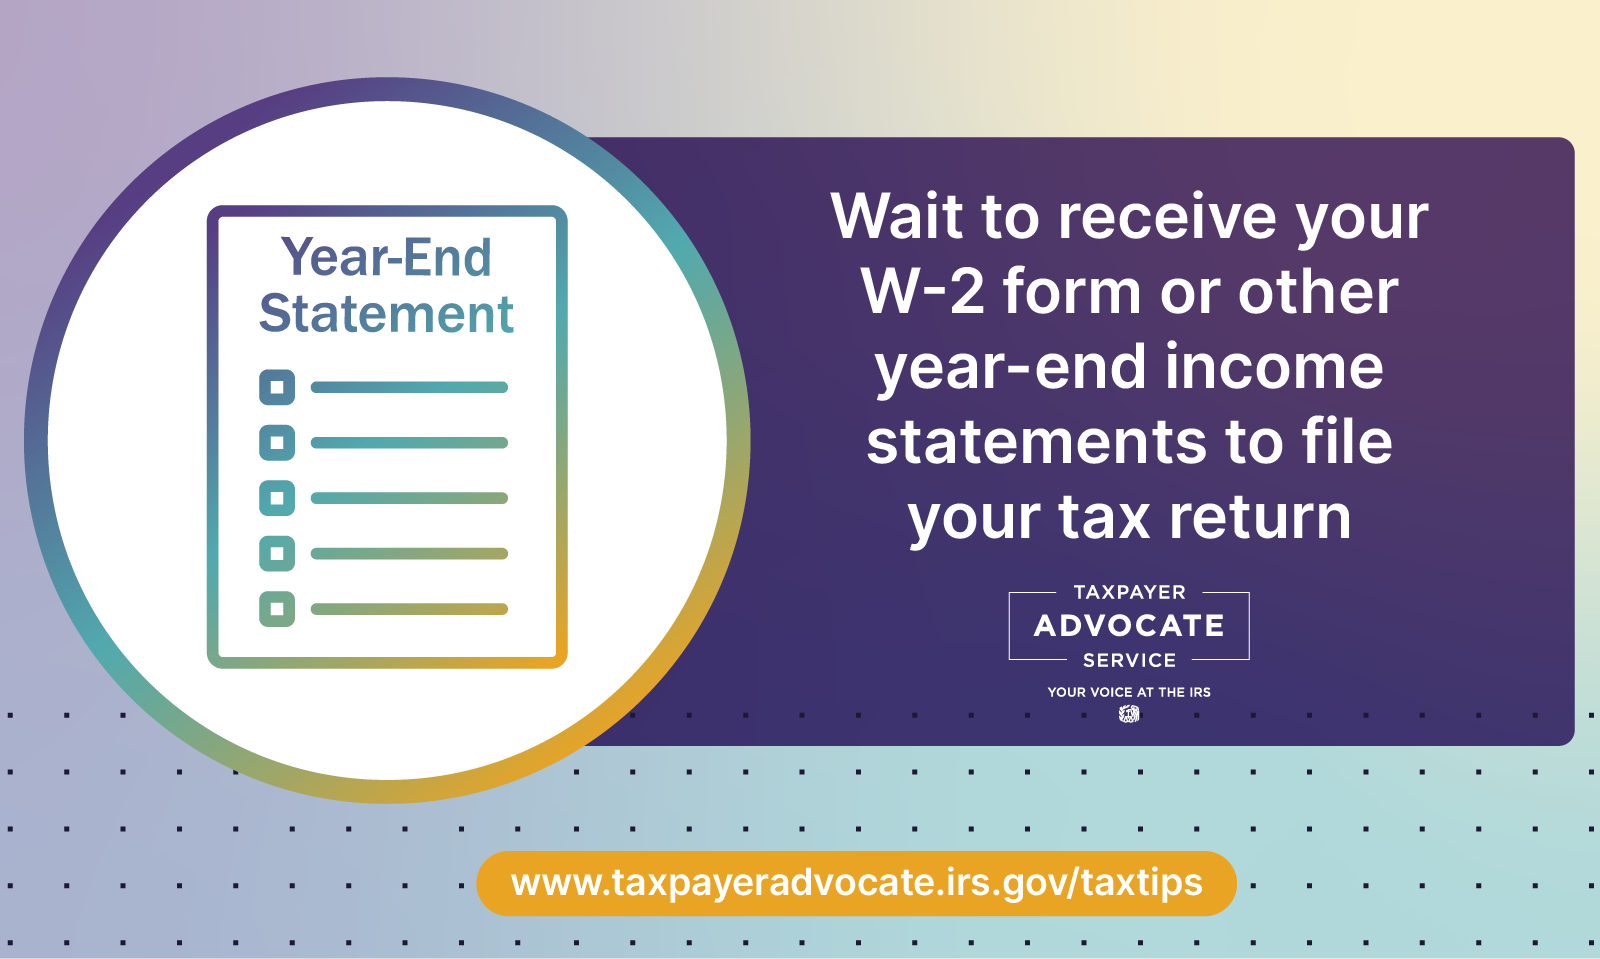 Year-end statement checklist in a circle. Wait to receive your W-2 form or other year-end income statements to file your tax return